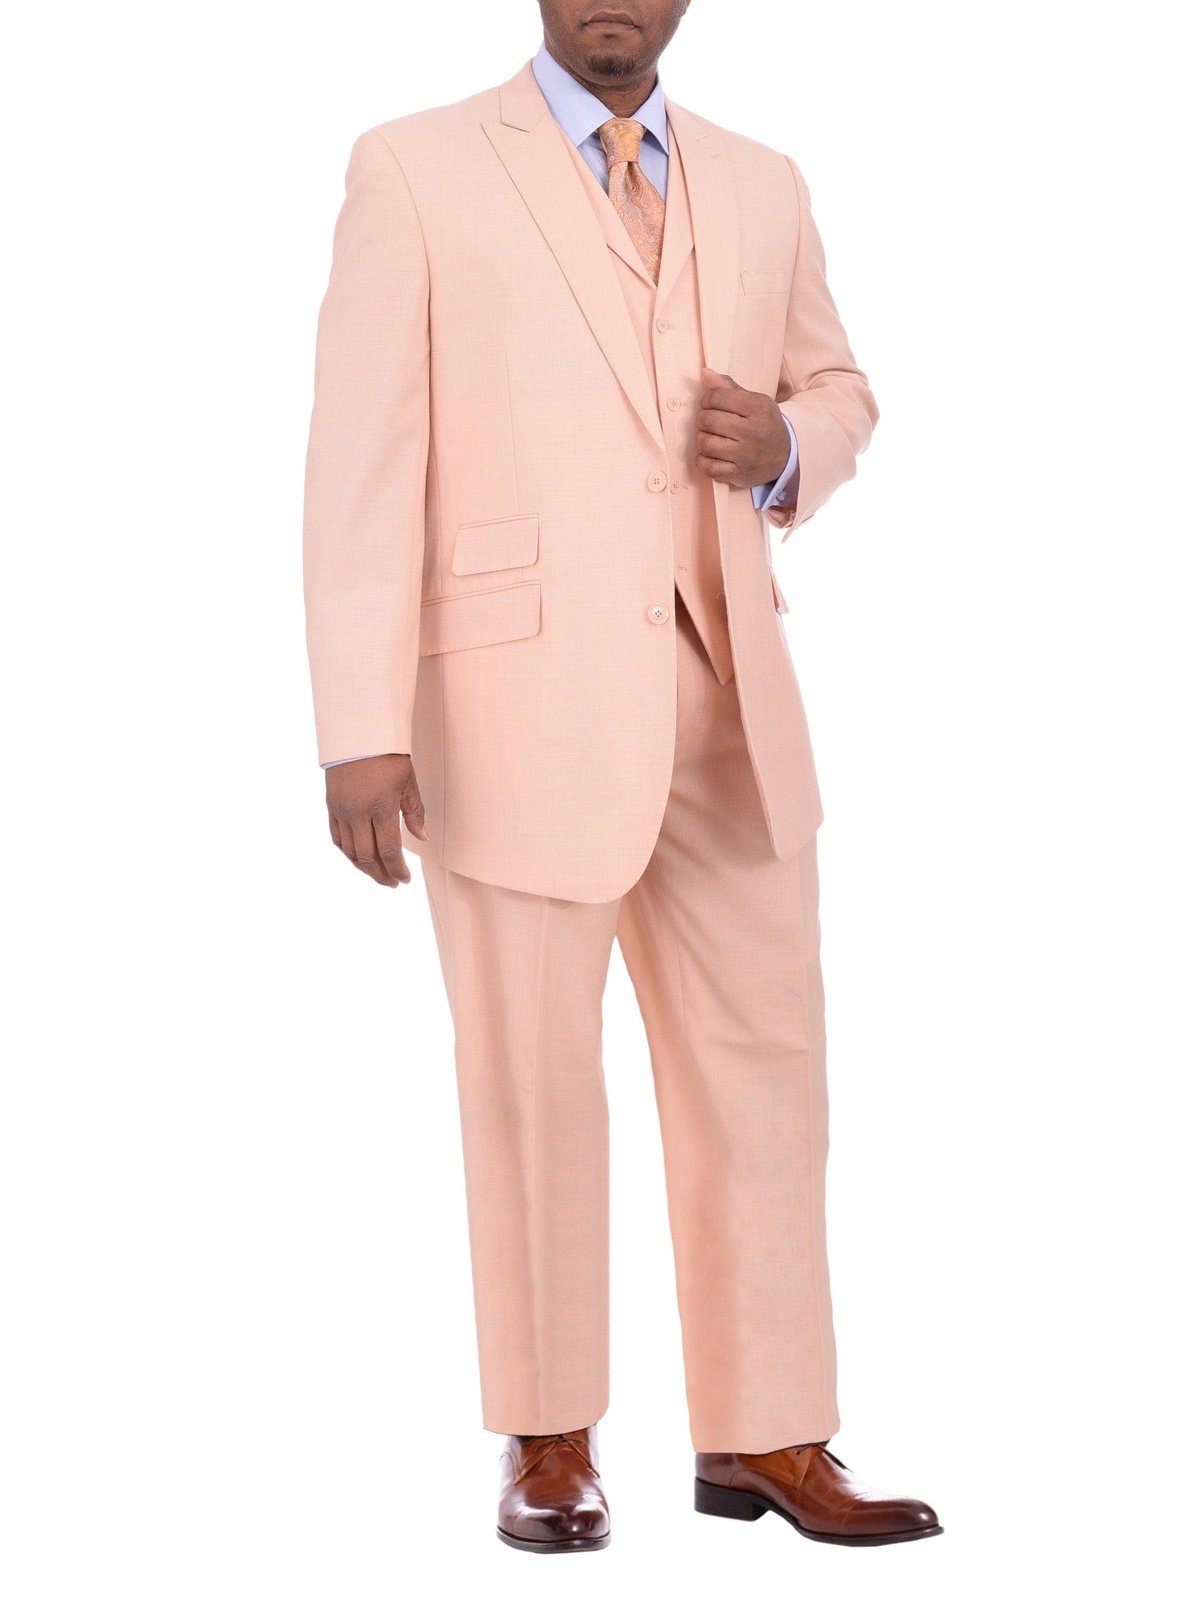 Apollo King Mens Solid Peach Three Piece Wool Suit With Peak Lapels | The  Suit Depot